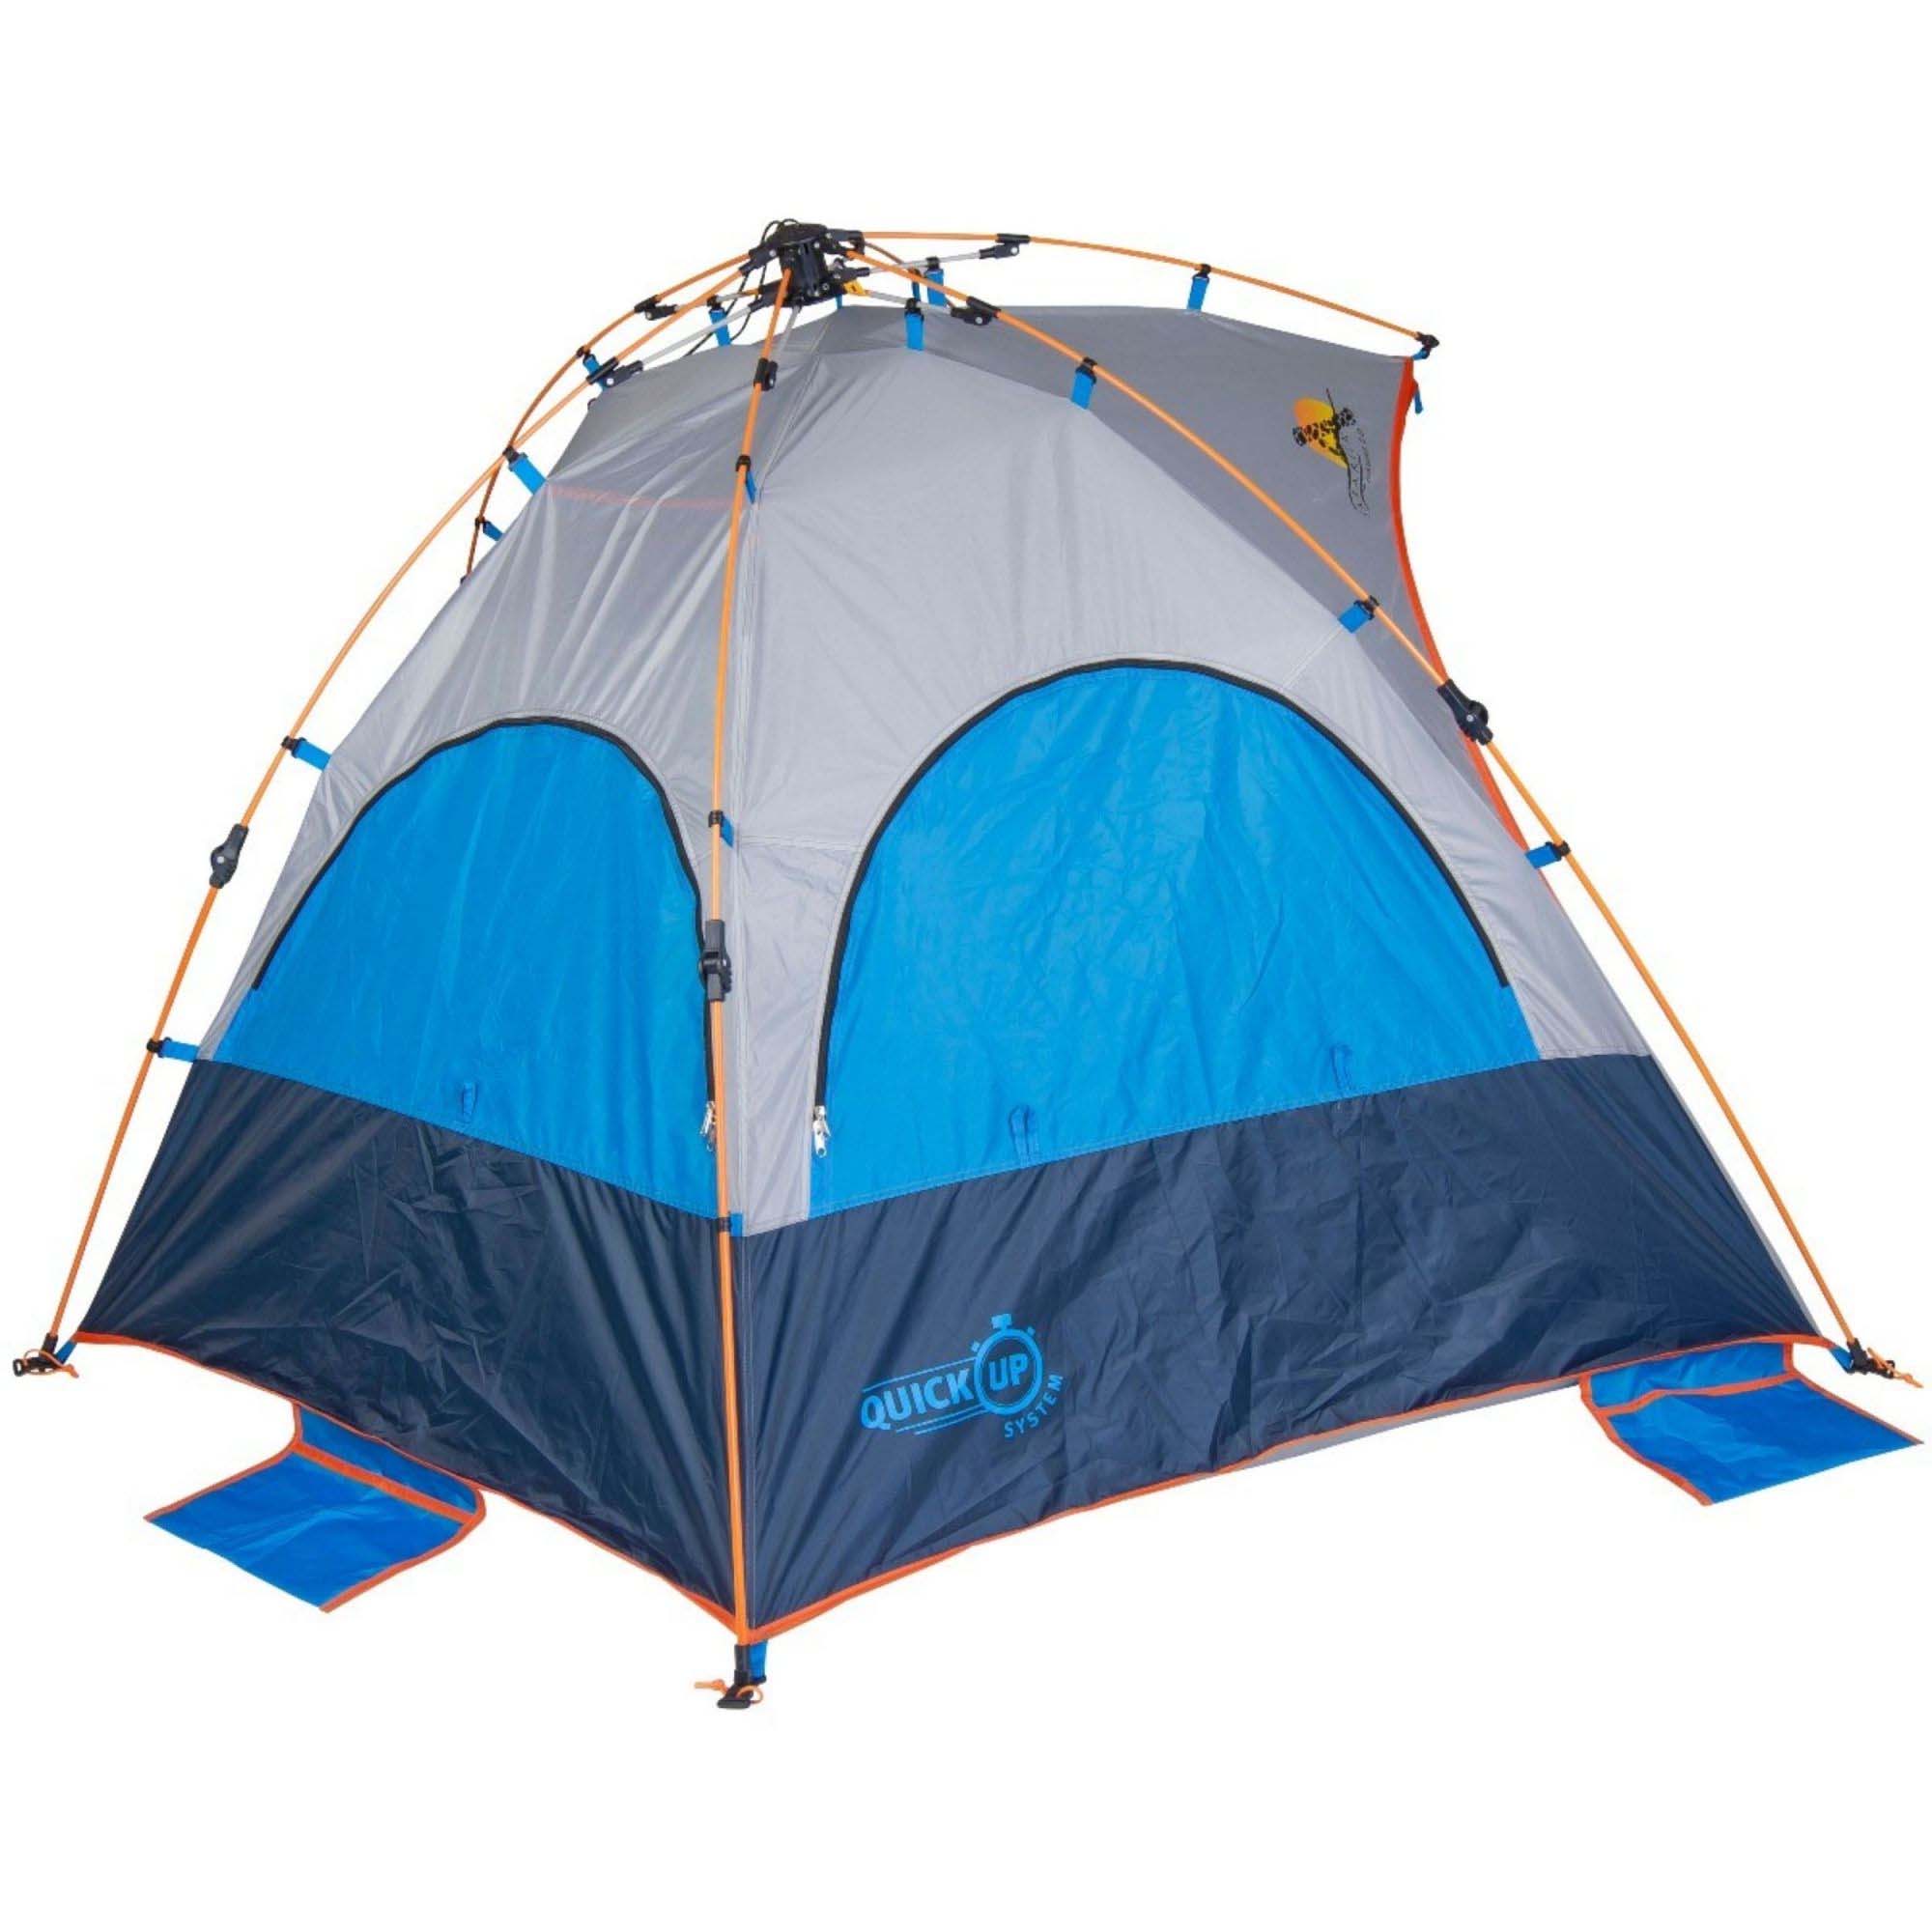 SAFARICA Hawaii 2.0 Quick Up Shelter Strandtent